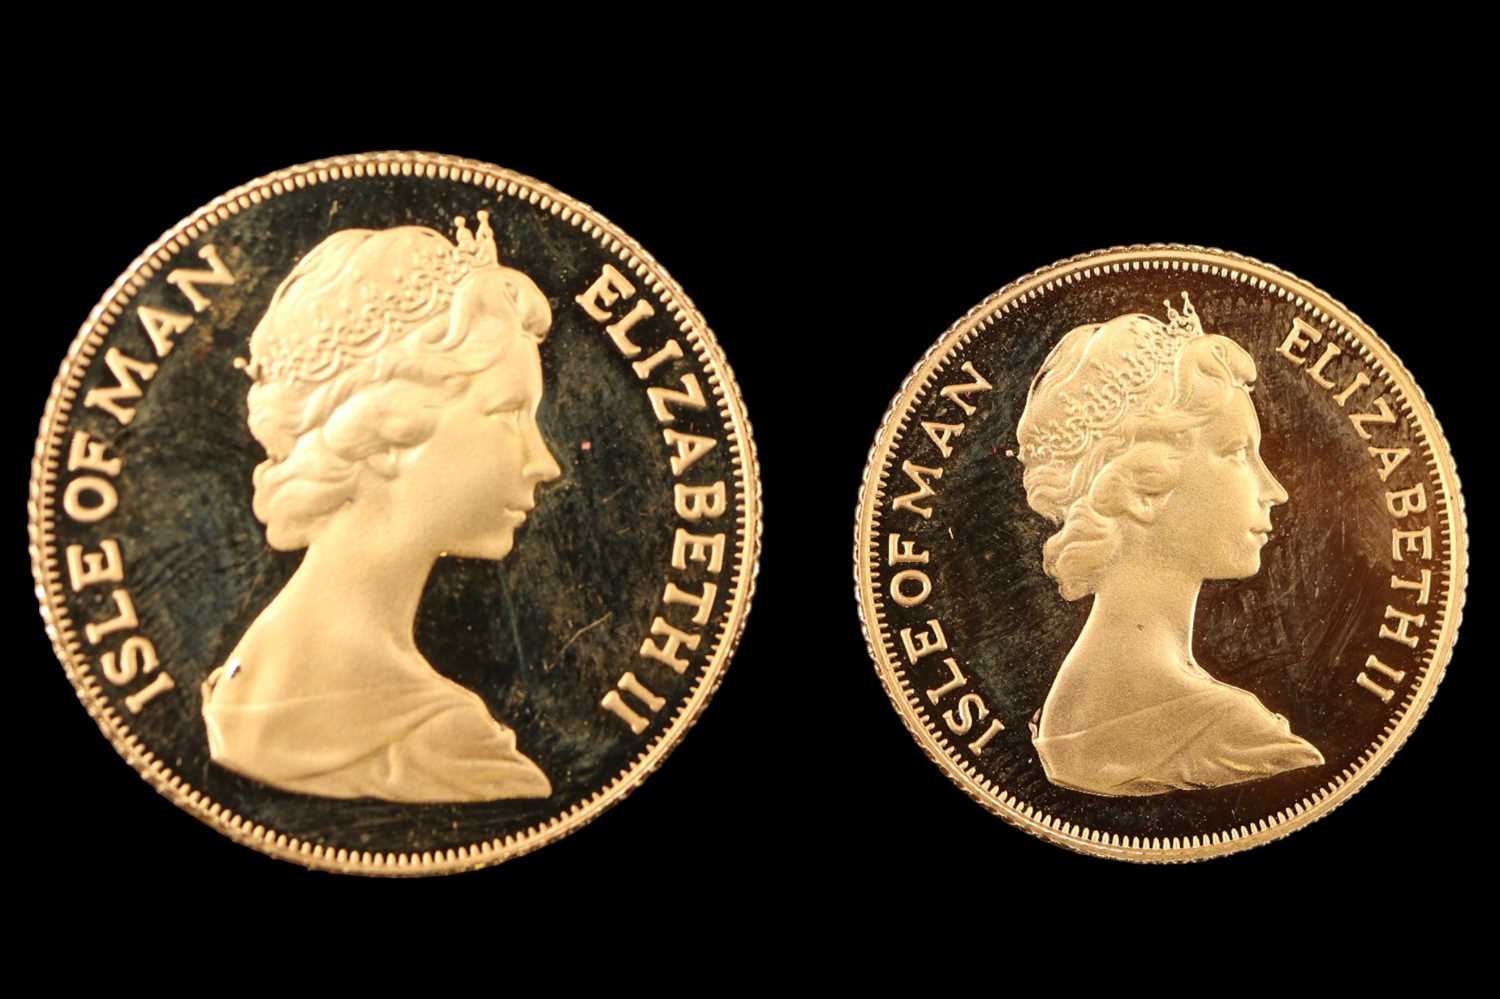 An Elizabeth II 1974 limited edition Isle of Man gold coin proof set, including £5, £2, sovereign - Image 4 of 6